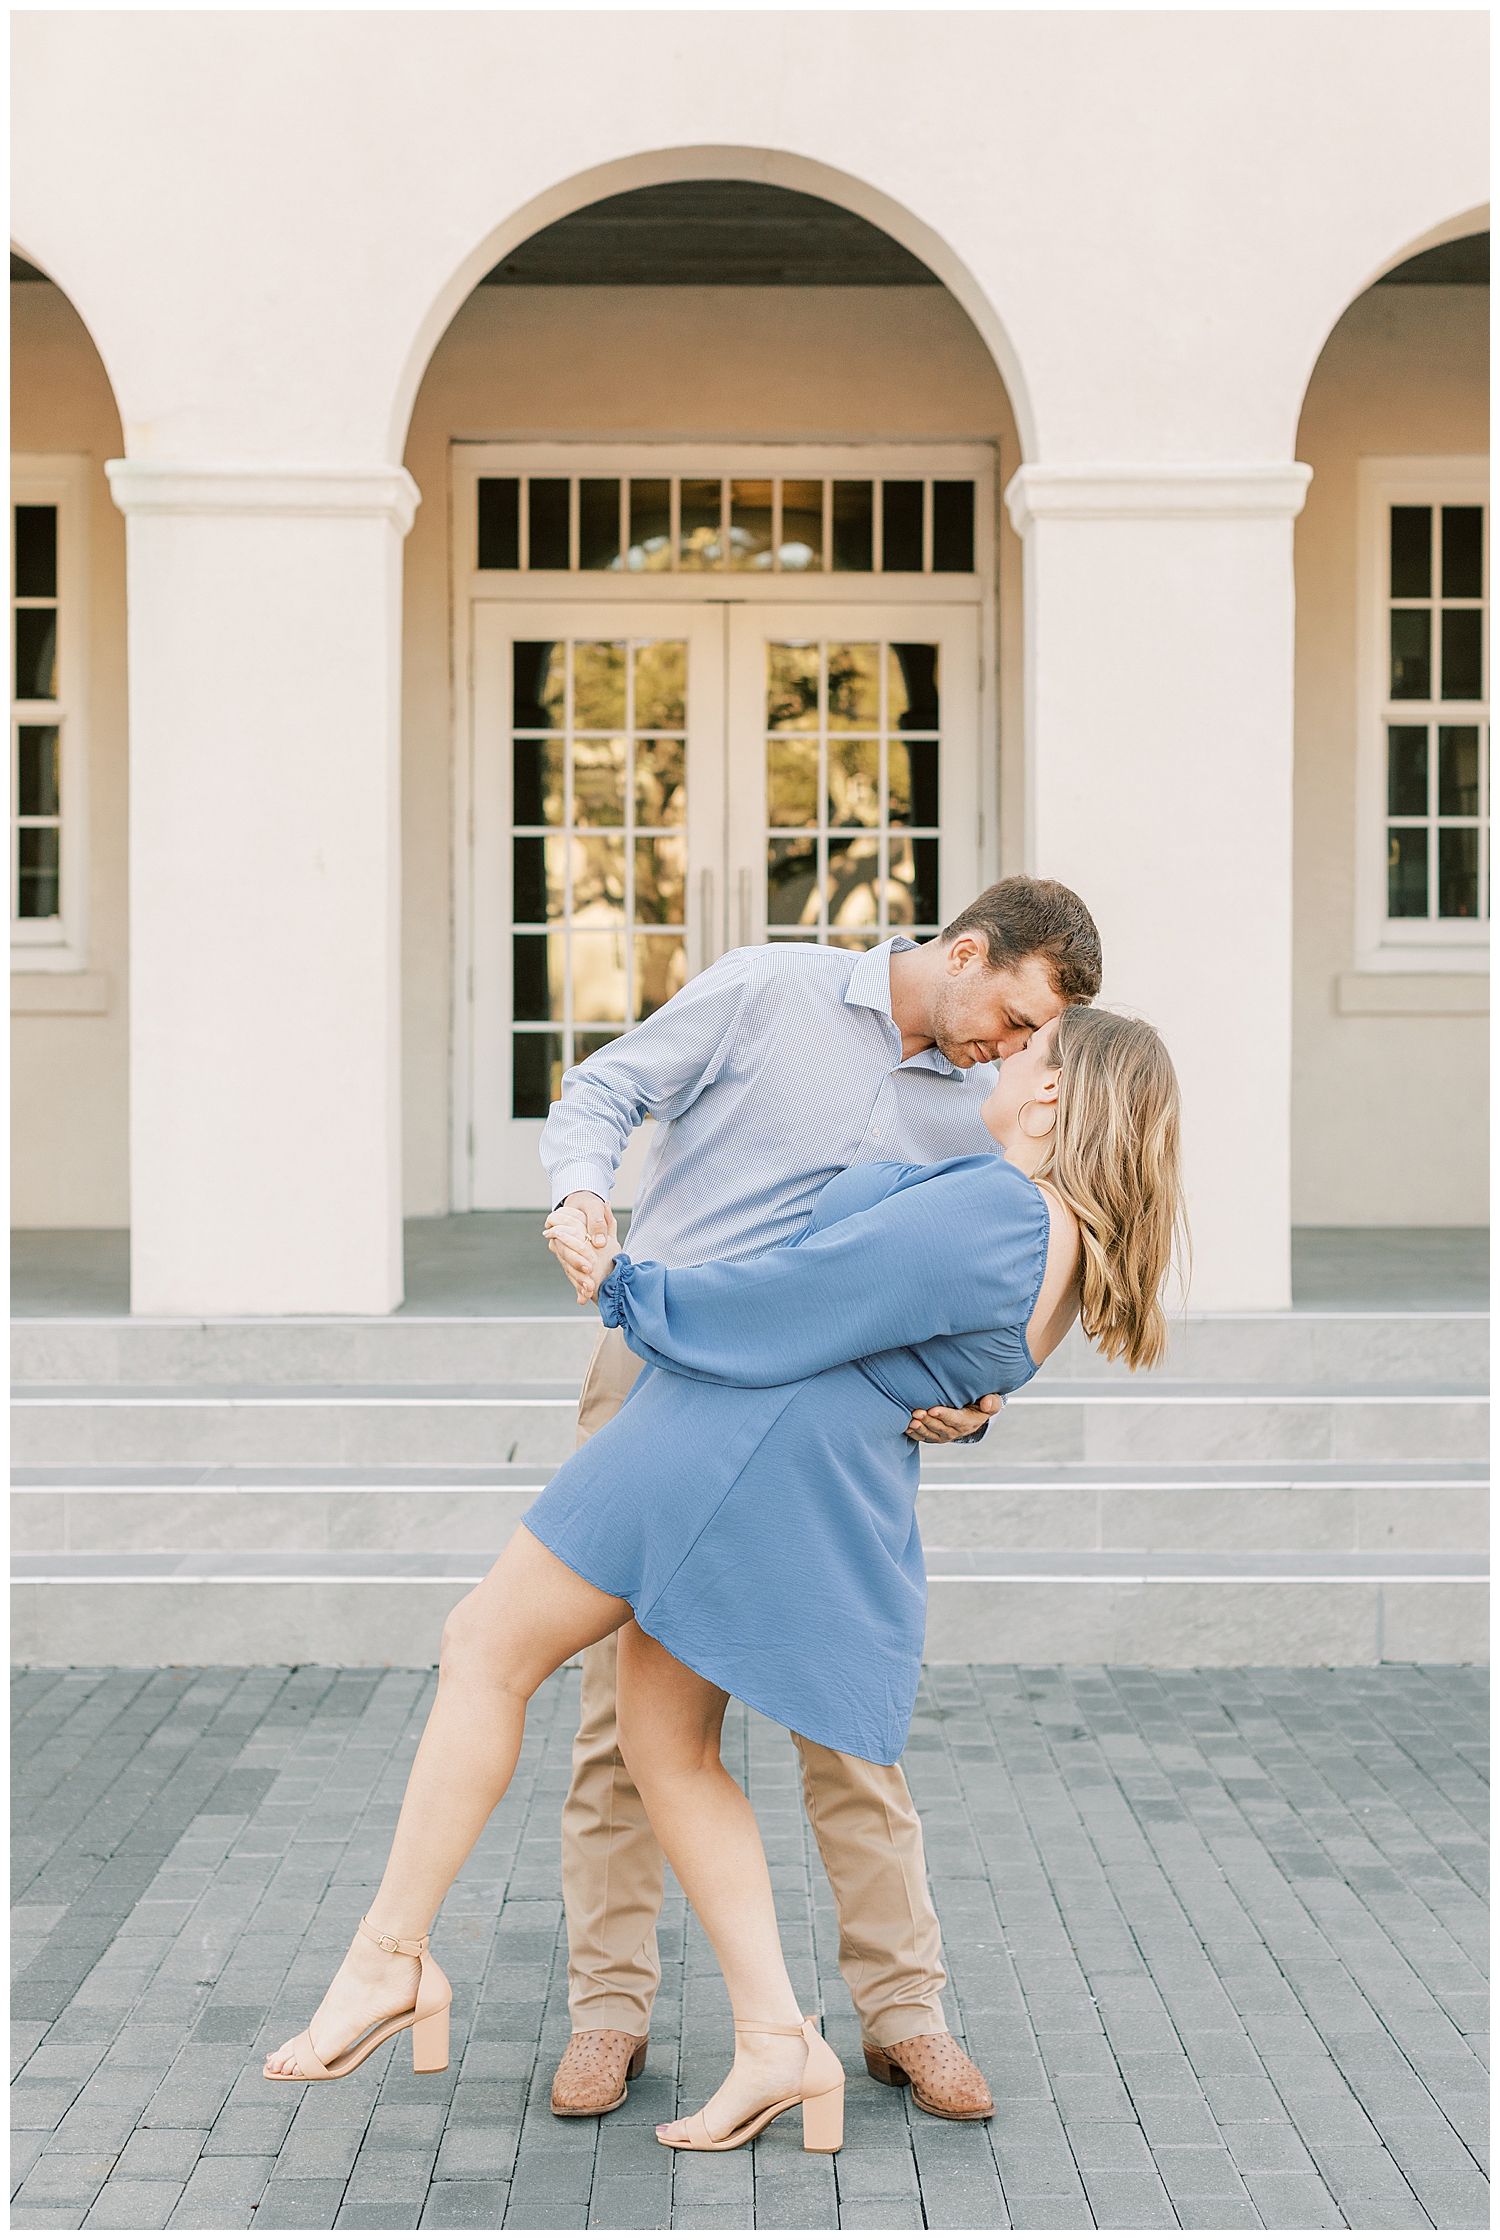 A couple embraces each other in front of an arch.